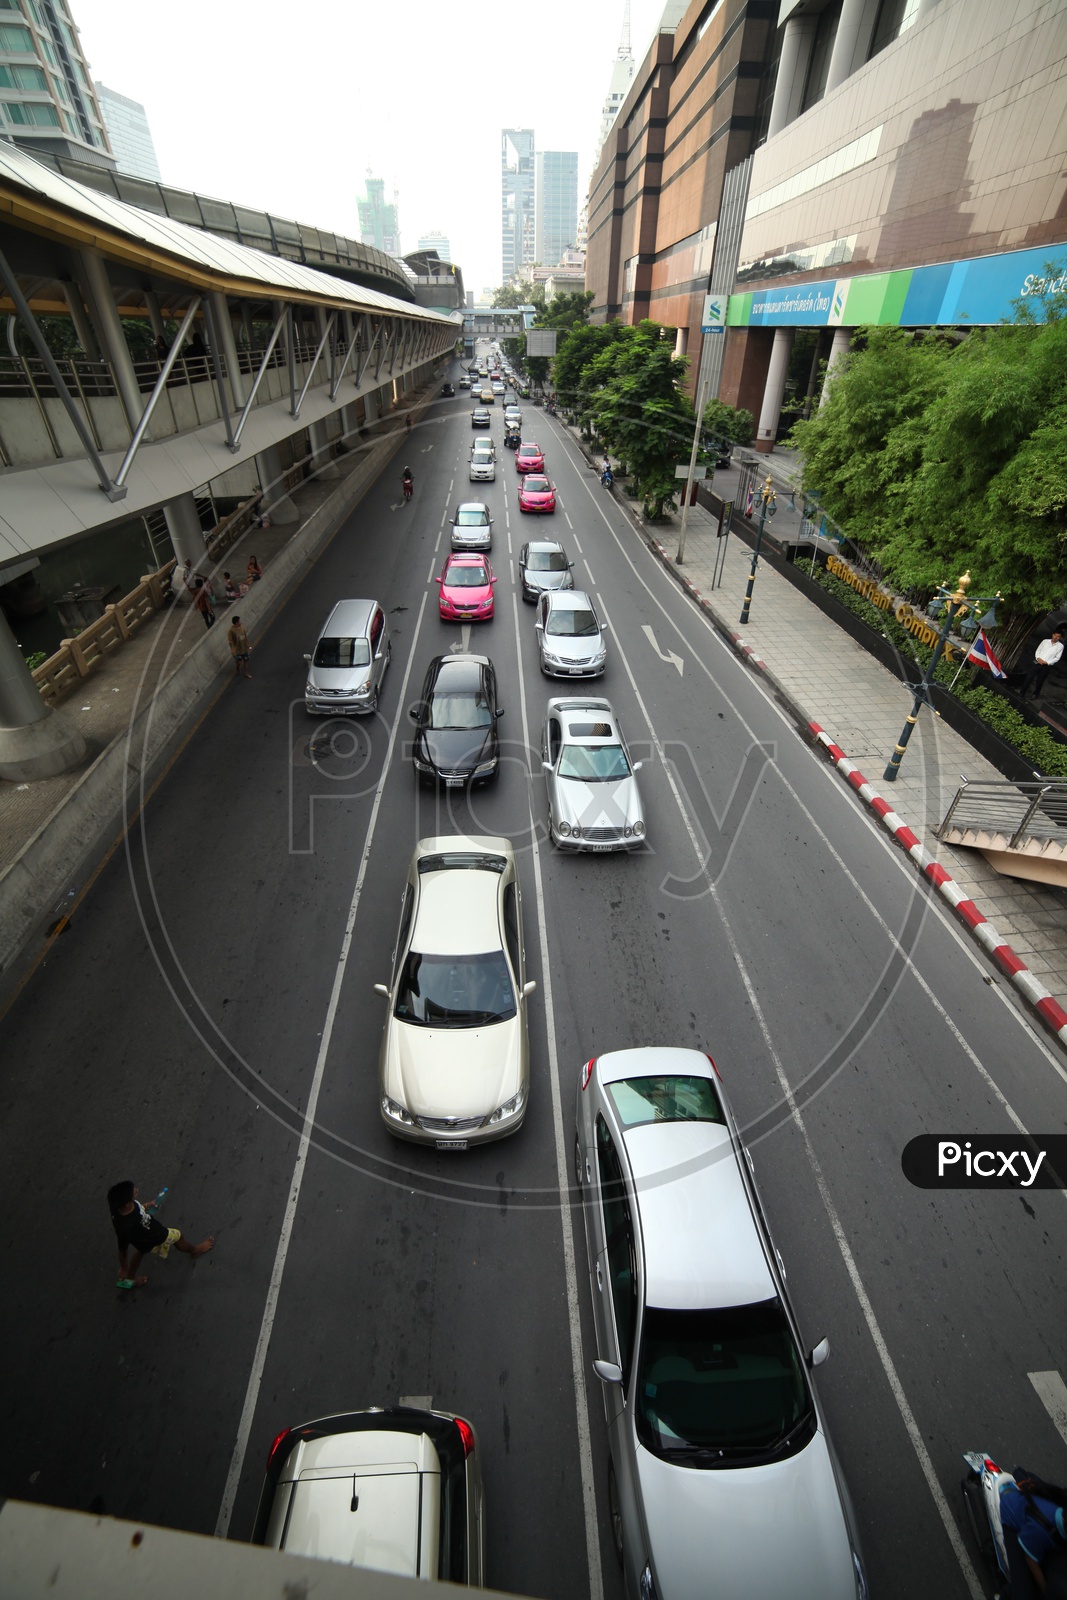 Vehicles moving in lanes of a road